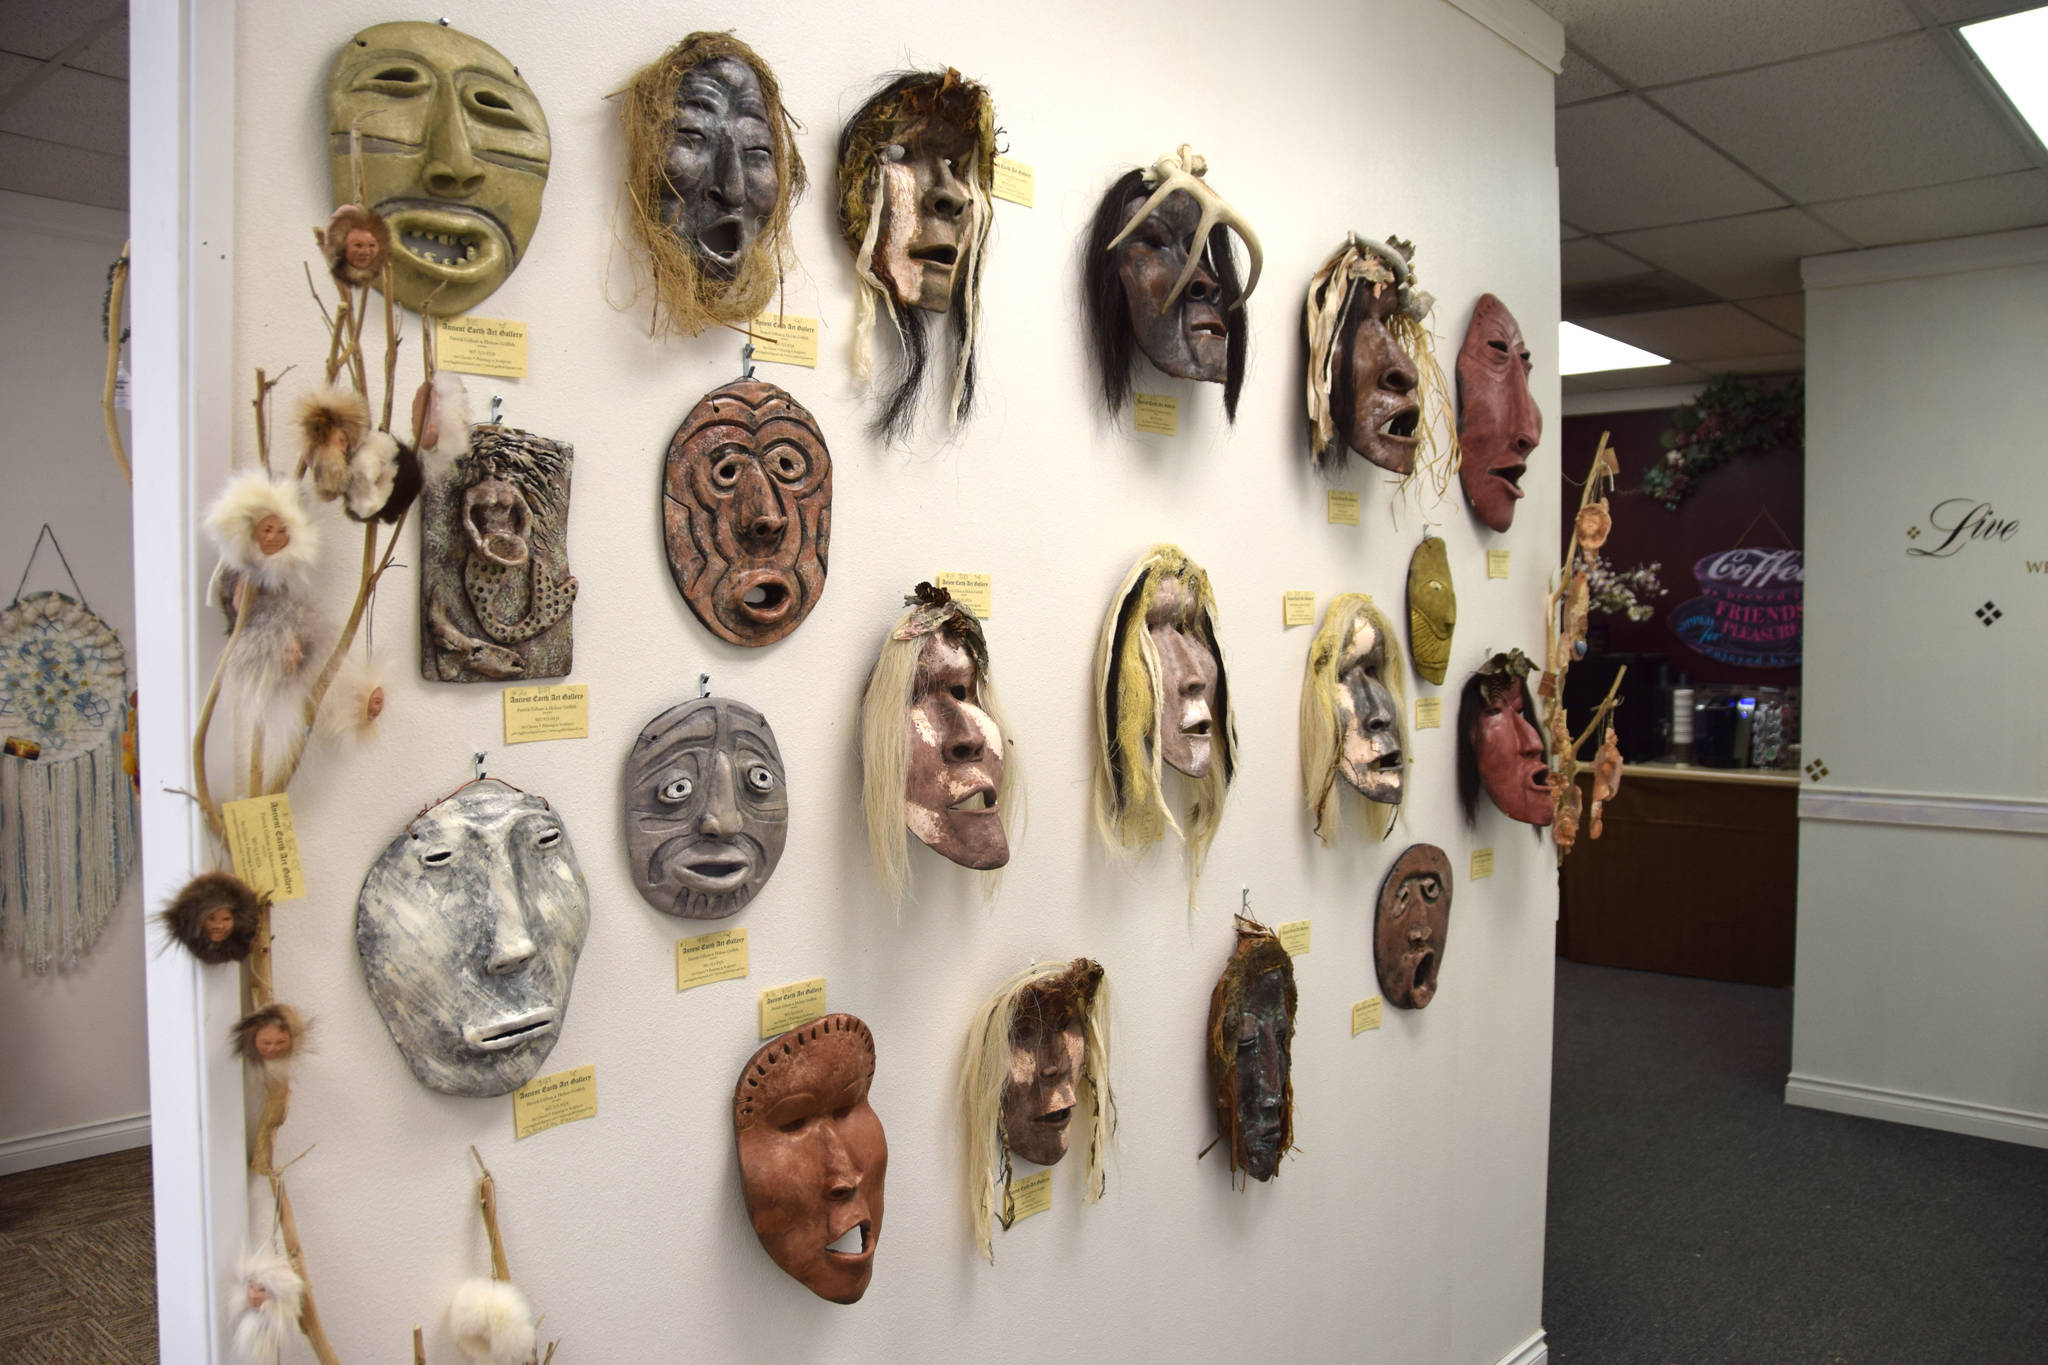 A set of healing masks made by artist Helene Griffith on display at the Positive Vibe gallery in Kenai on Wednesday, Jan. 30, 2019. (Photo by Brian Mazurek/Peninsula Clarion)